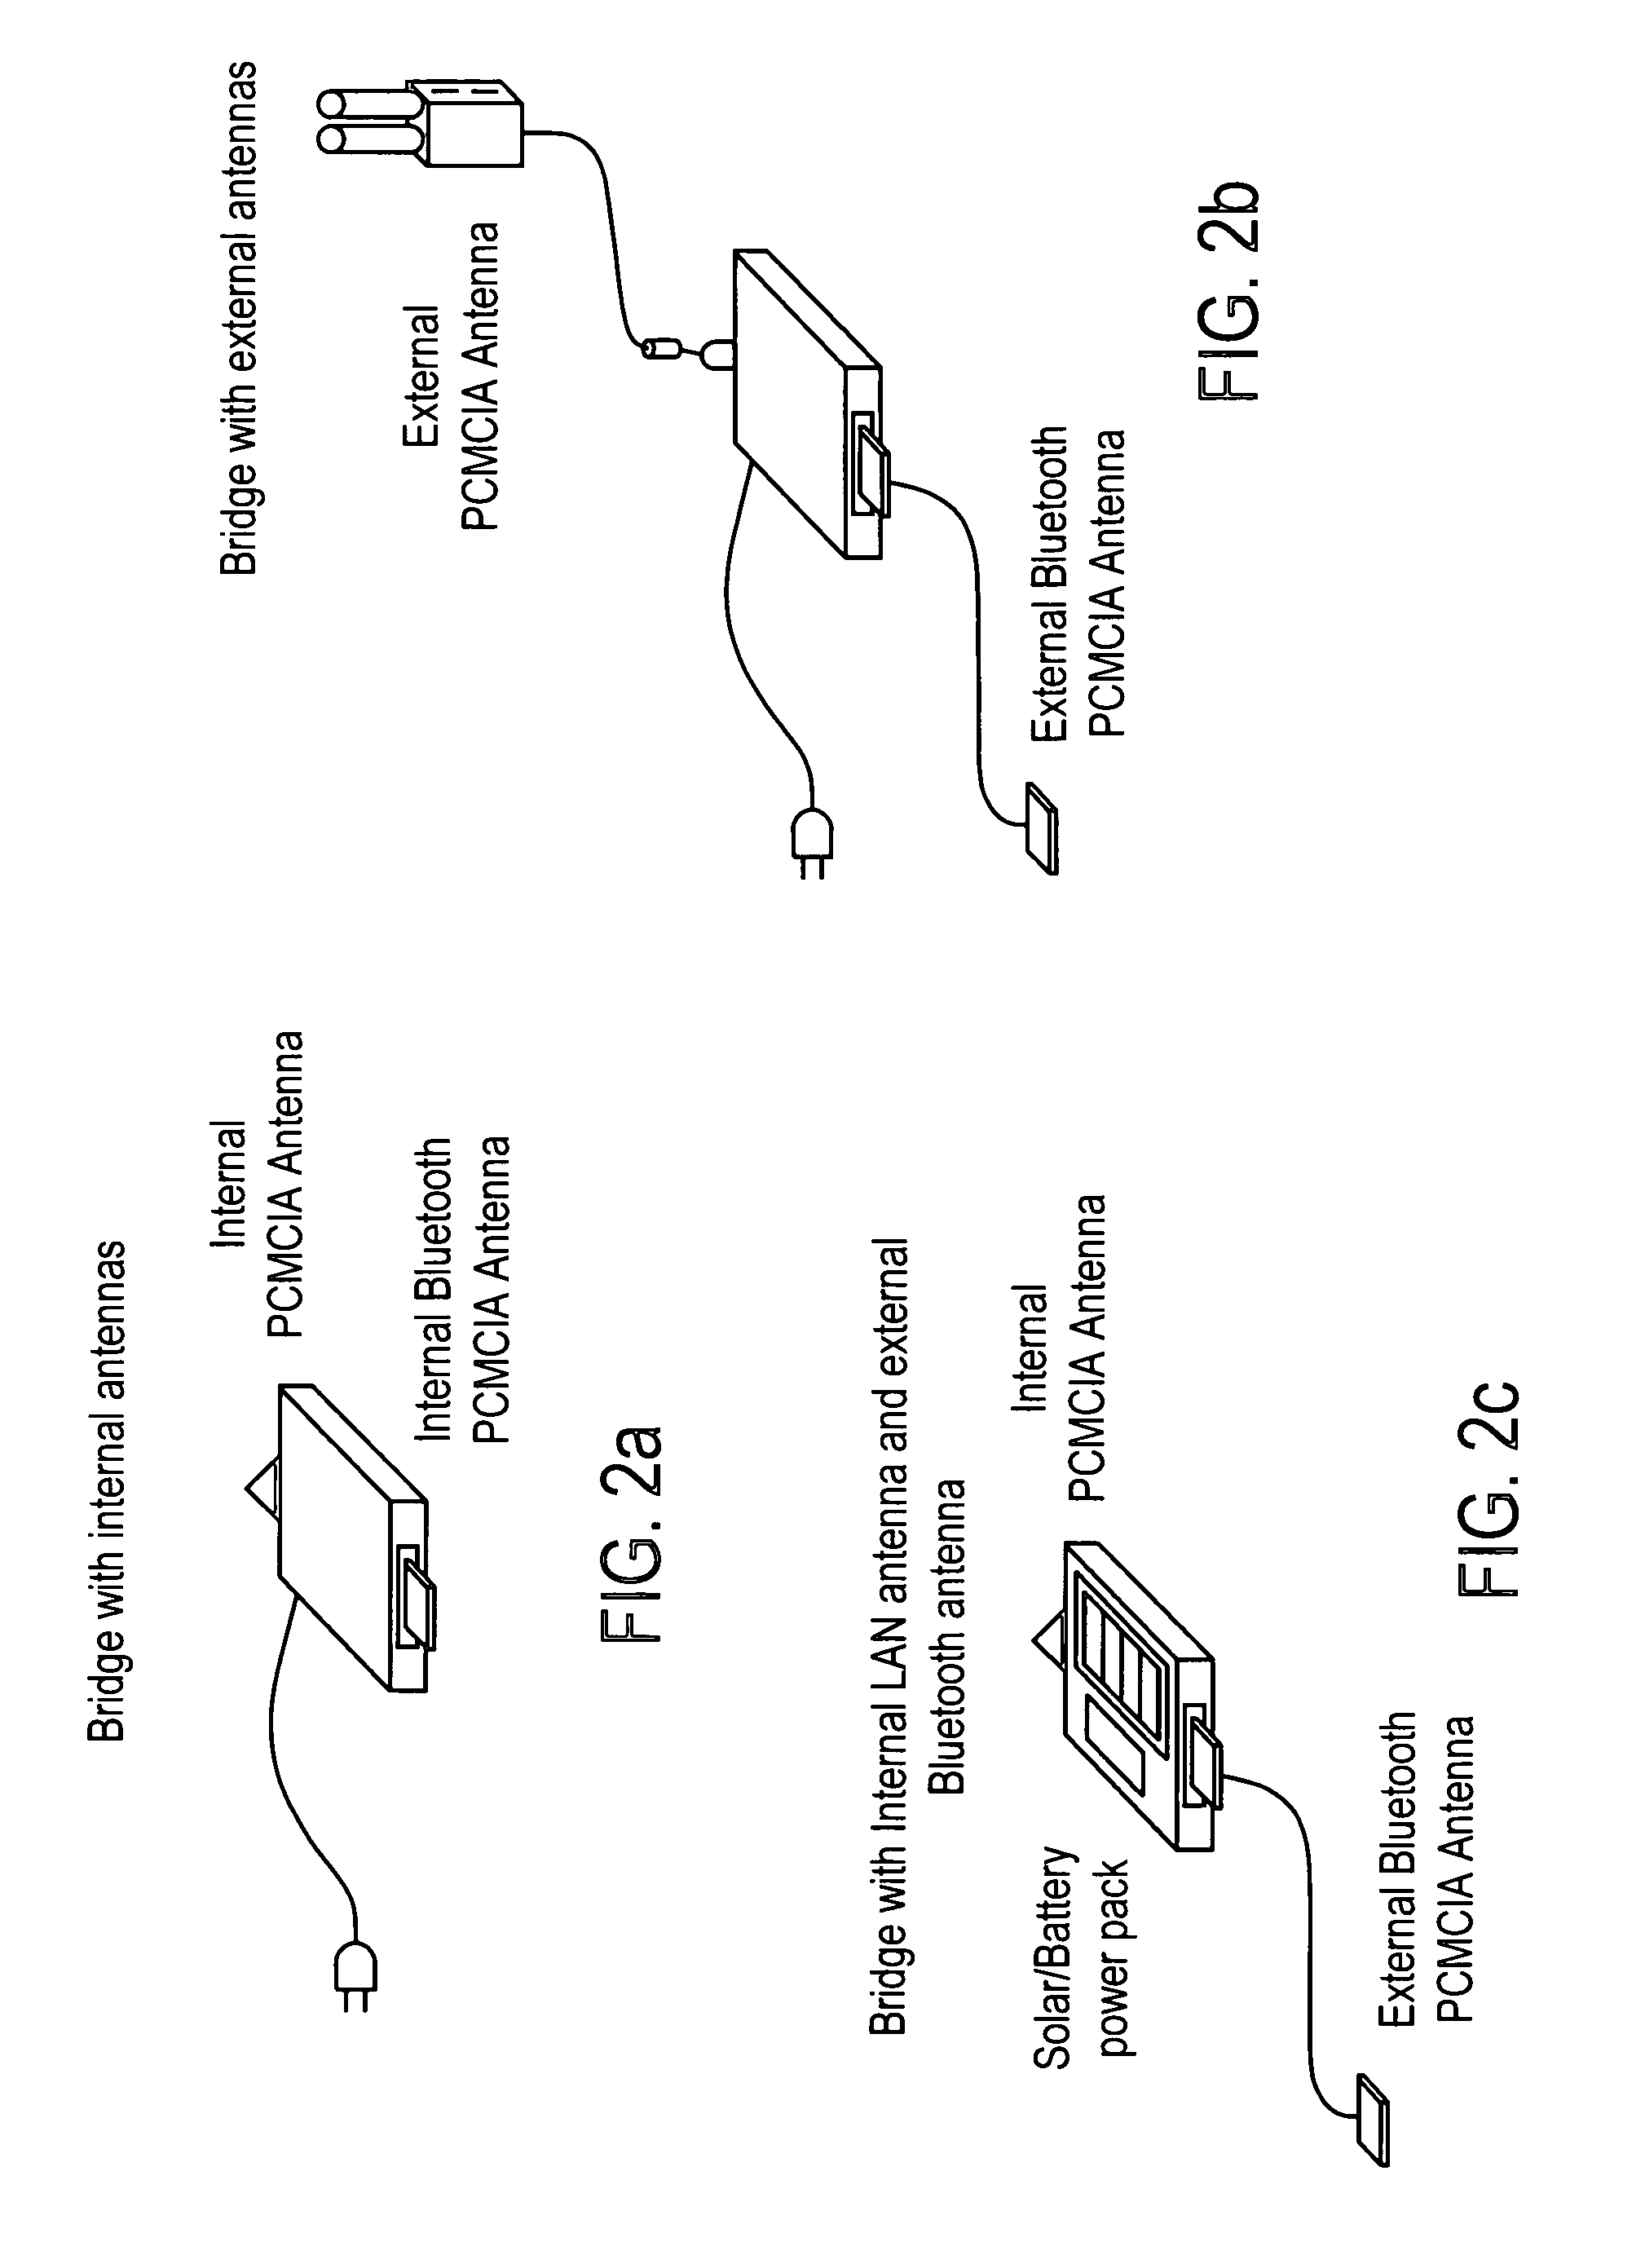 Bridging apparatus for interconnecting a wireless PAN and a wireless LAN